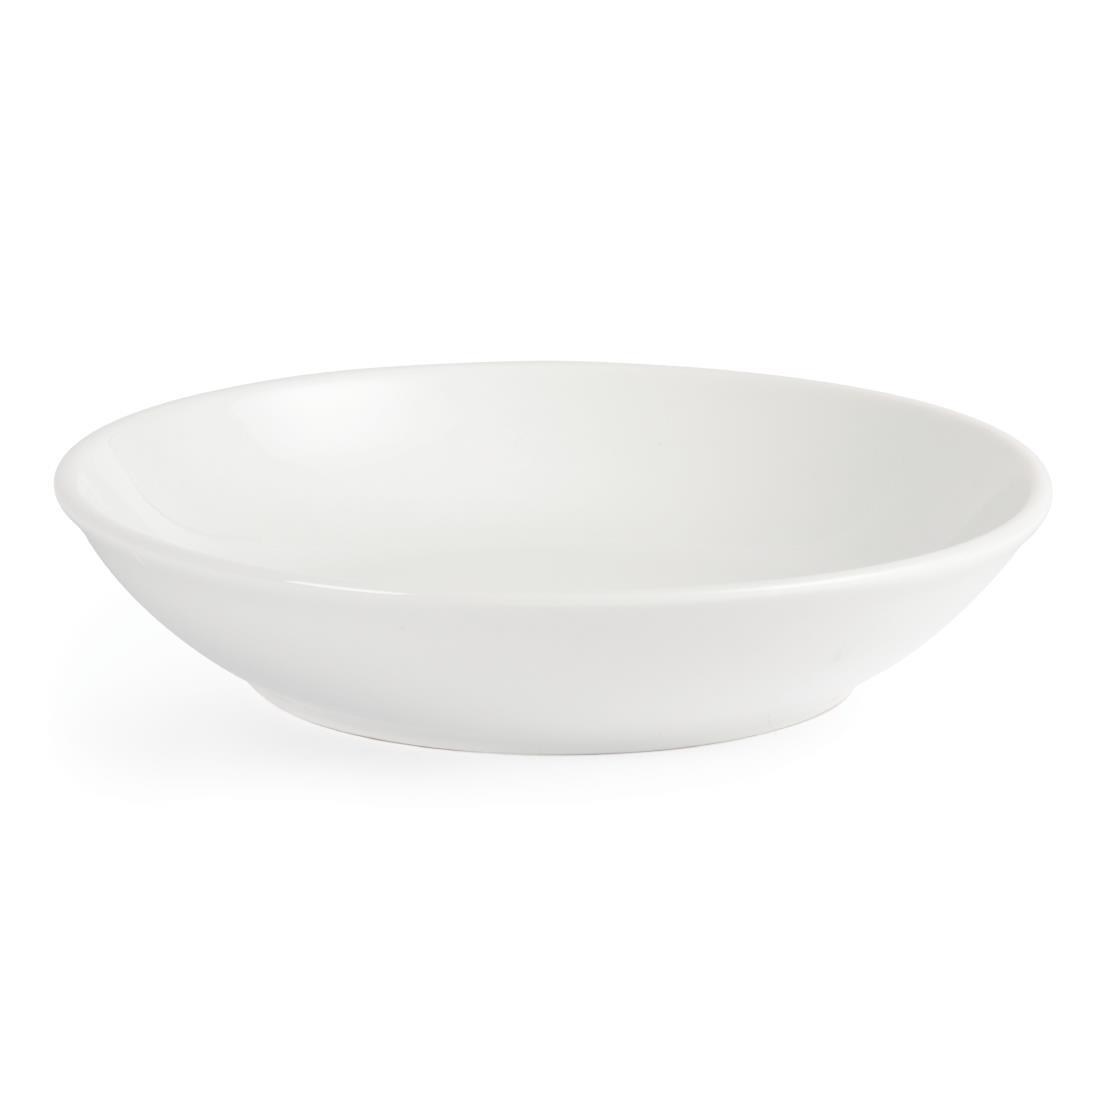 Olympia Whiteware Coupe Bowls 205mm (Pack of 6) - CM188  - 3